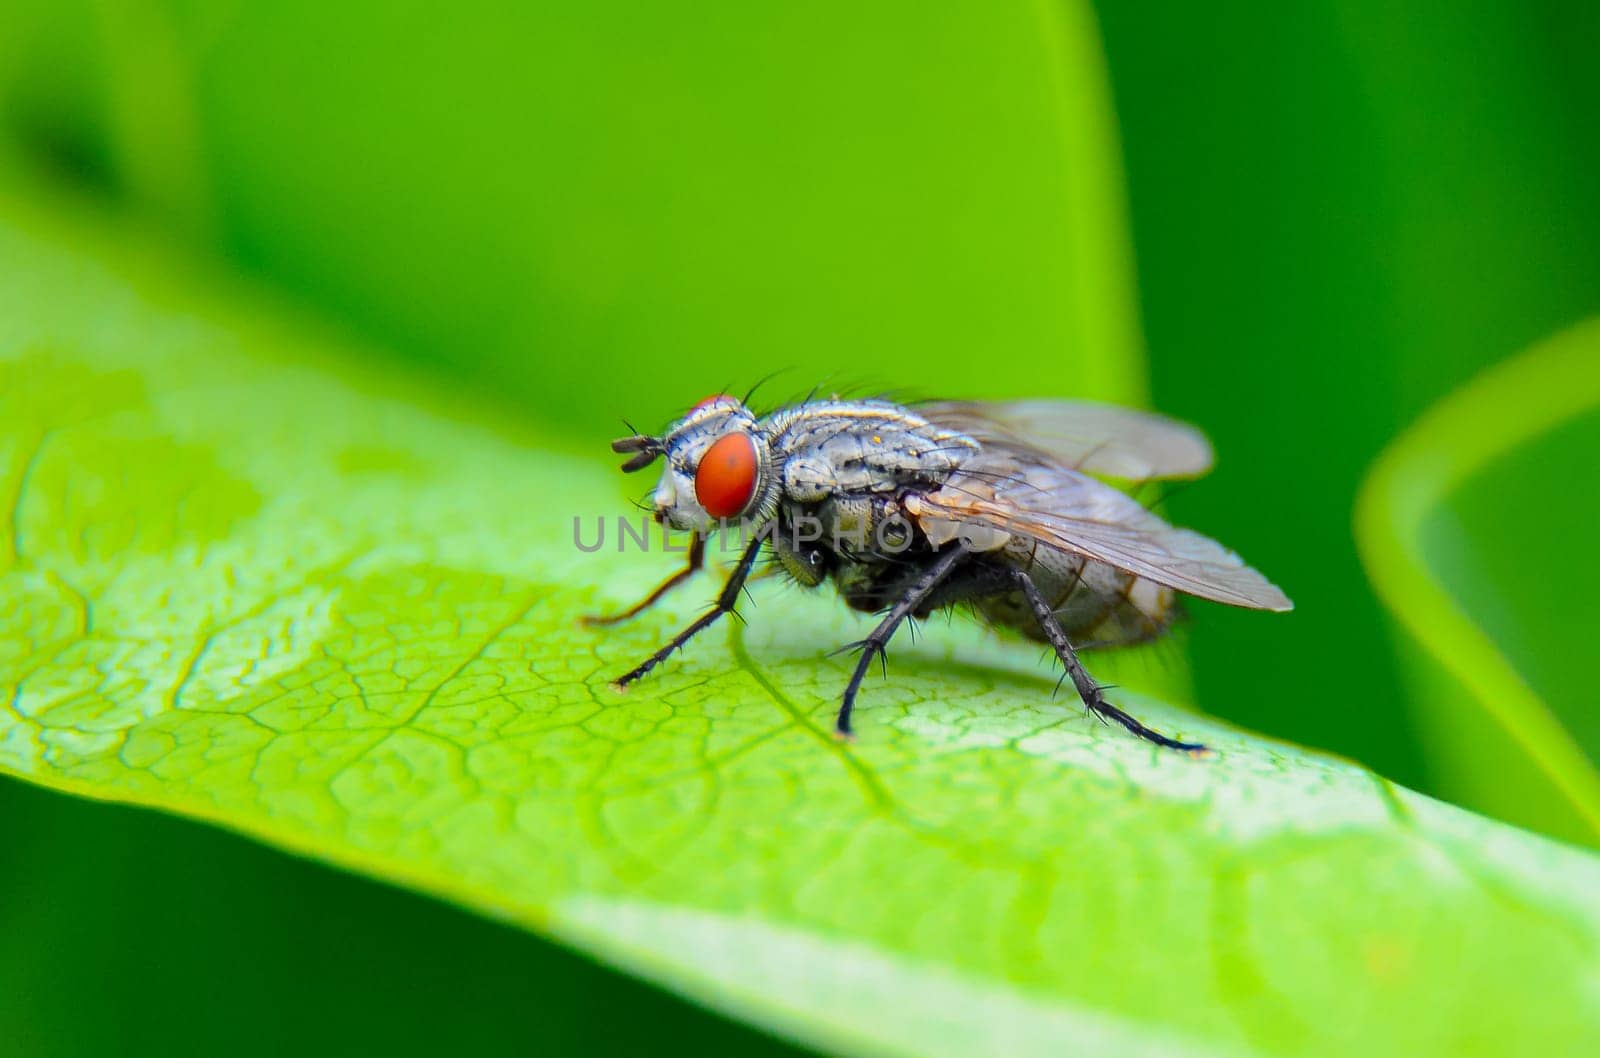 (Sarcophaga carnaria), large gray meat fly on a green leaf